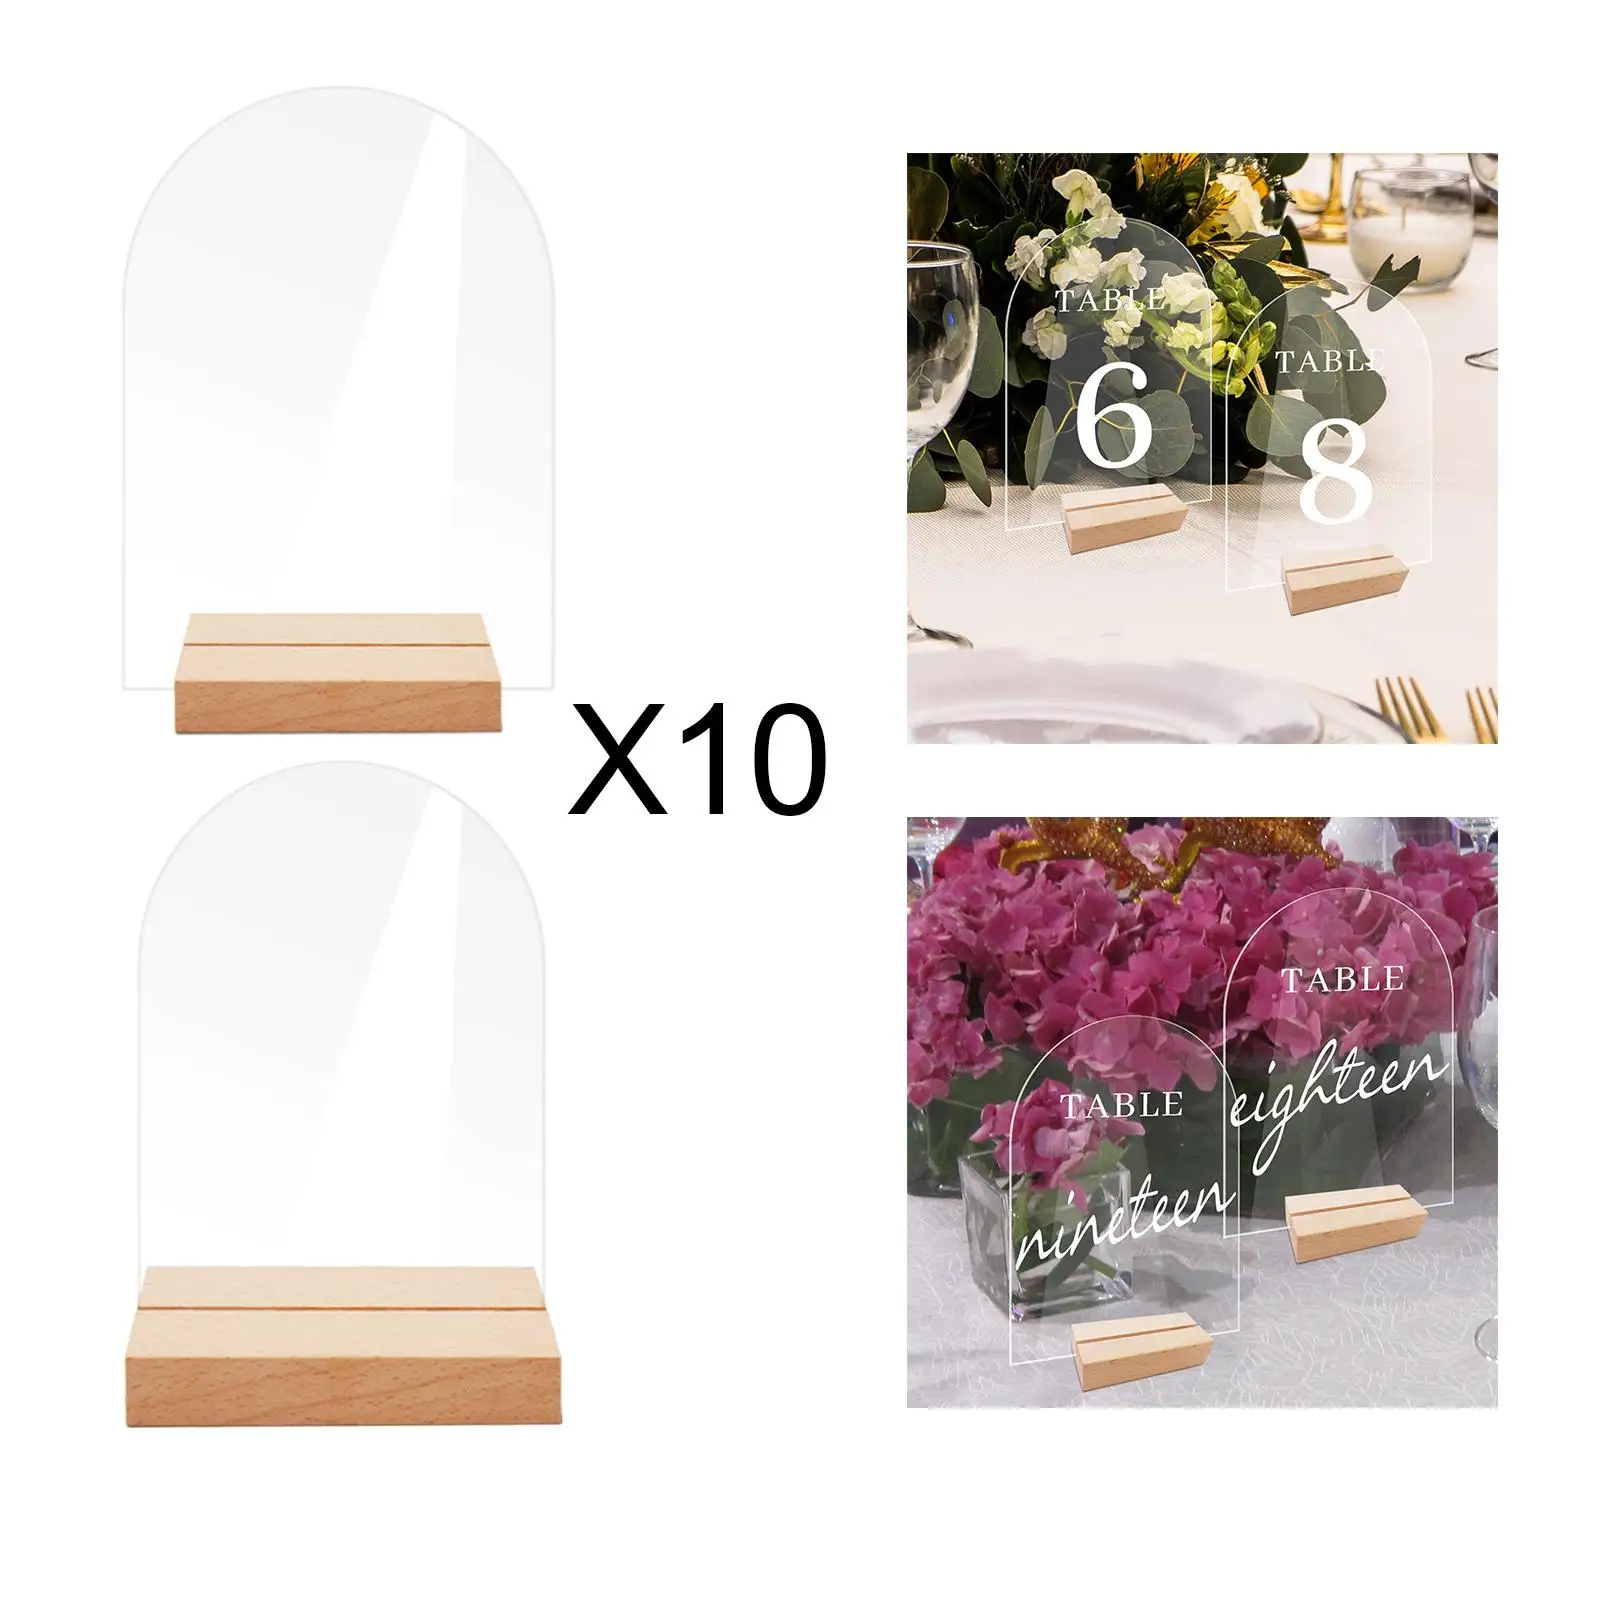 10x Clear Acrylic Place Cards Name Signs Cards with Stand Blank Plate Table Numbers for Wedding Dinner Birthday Banquet Decor